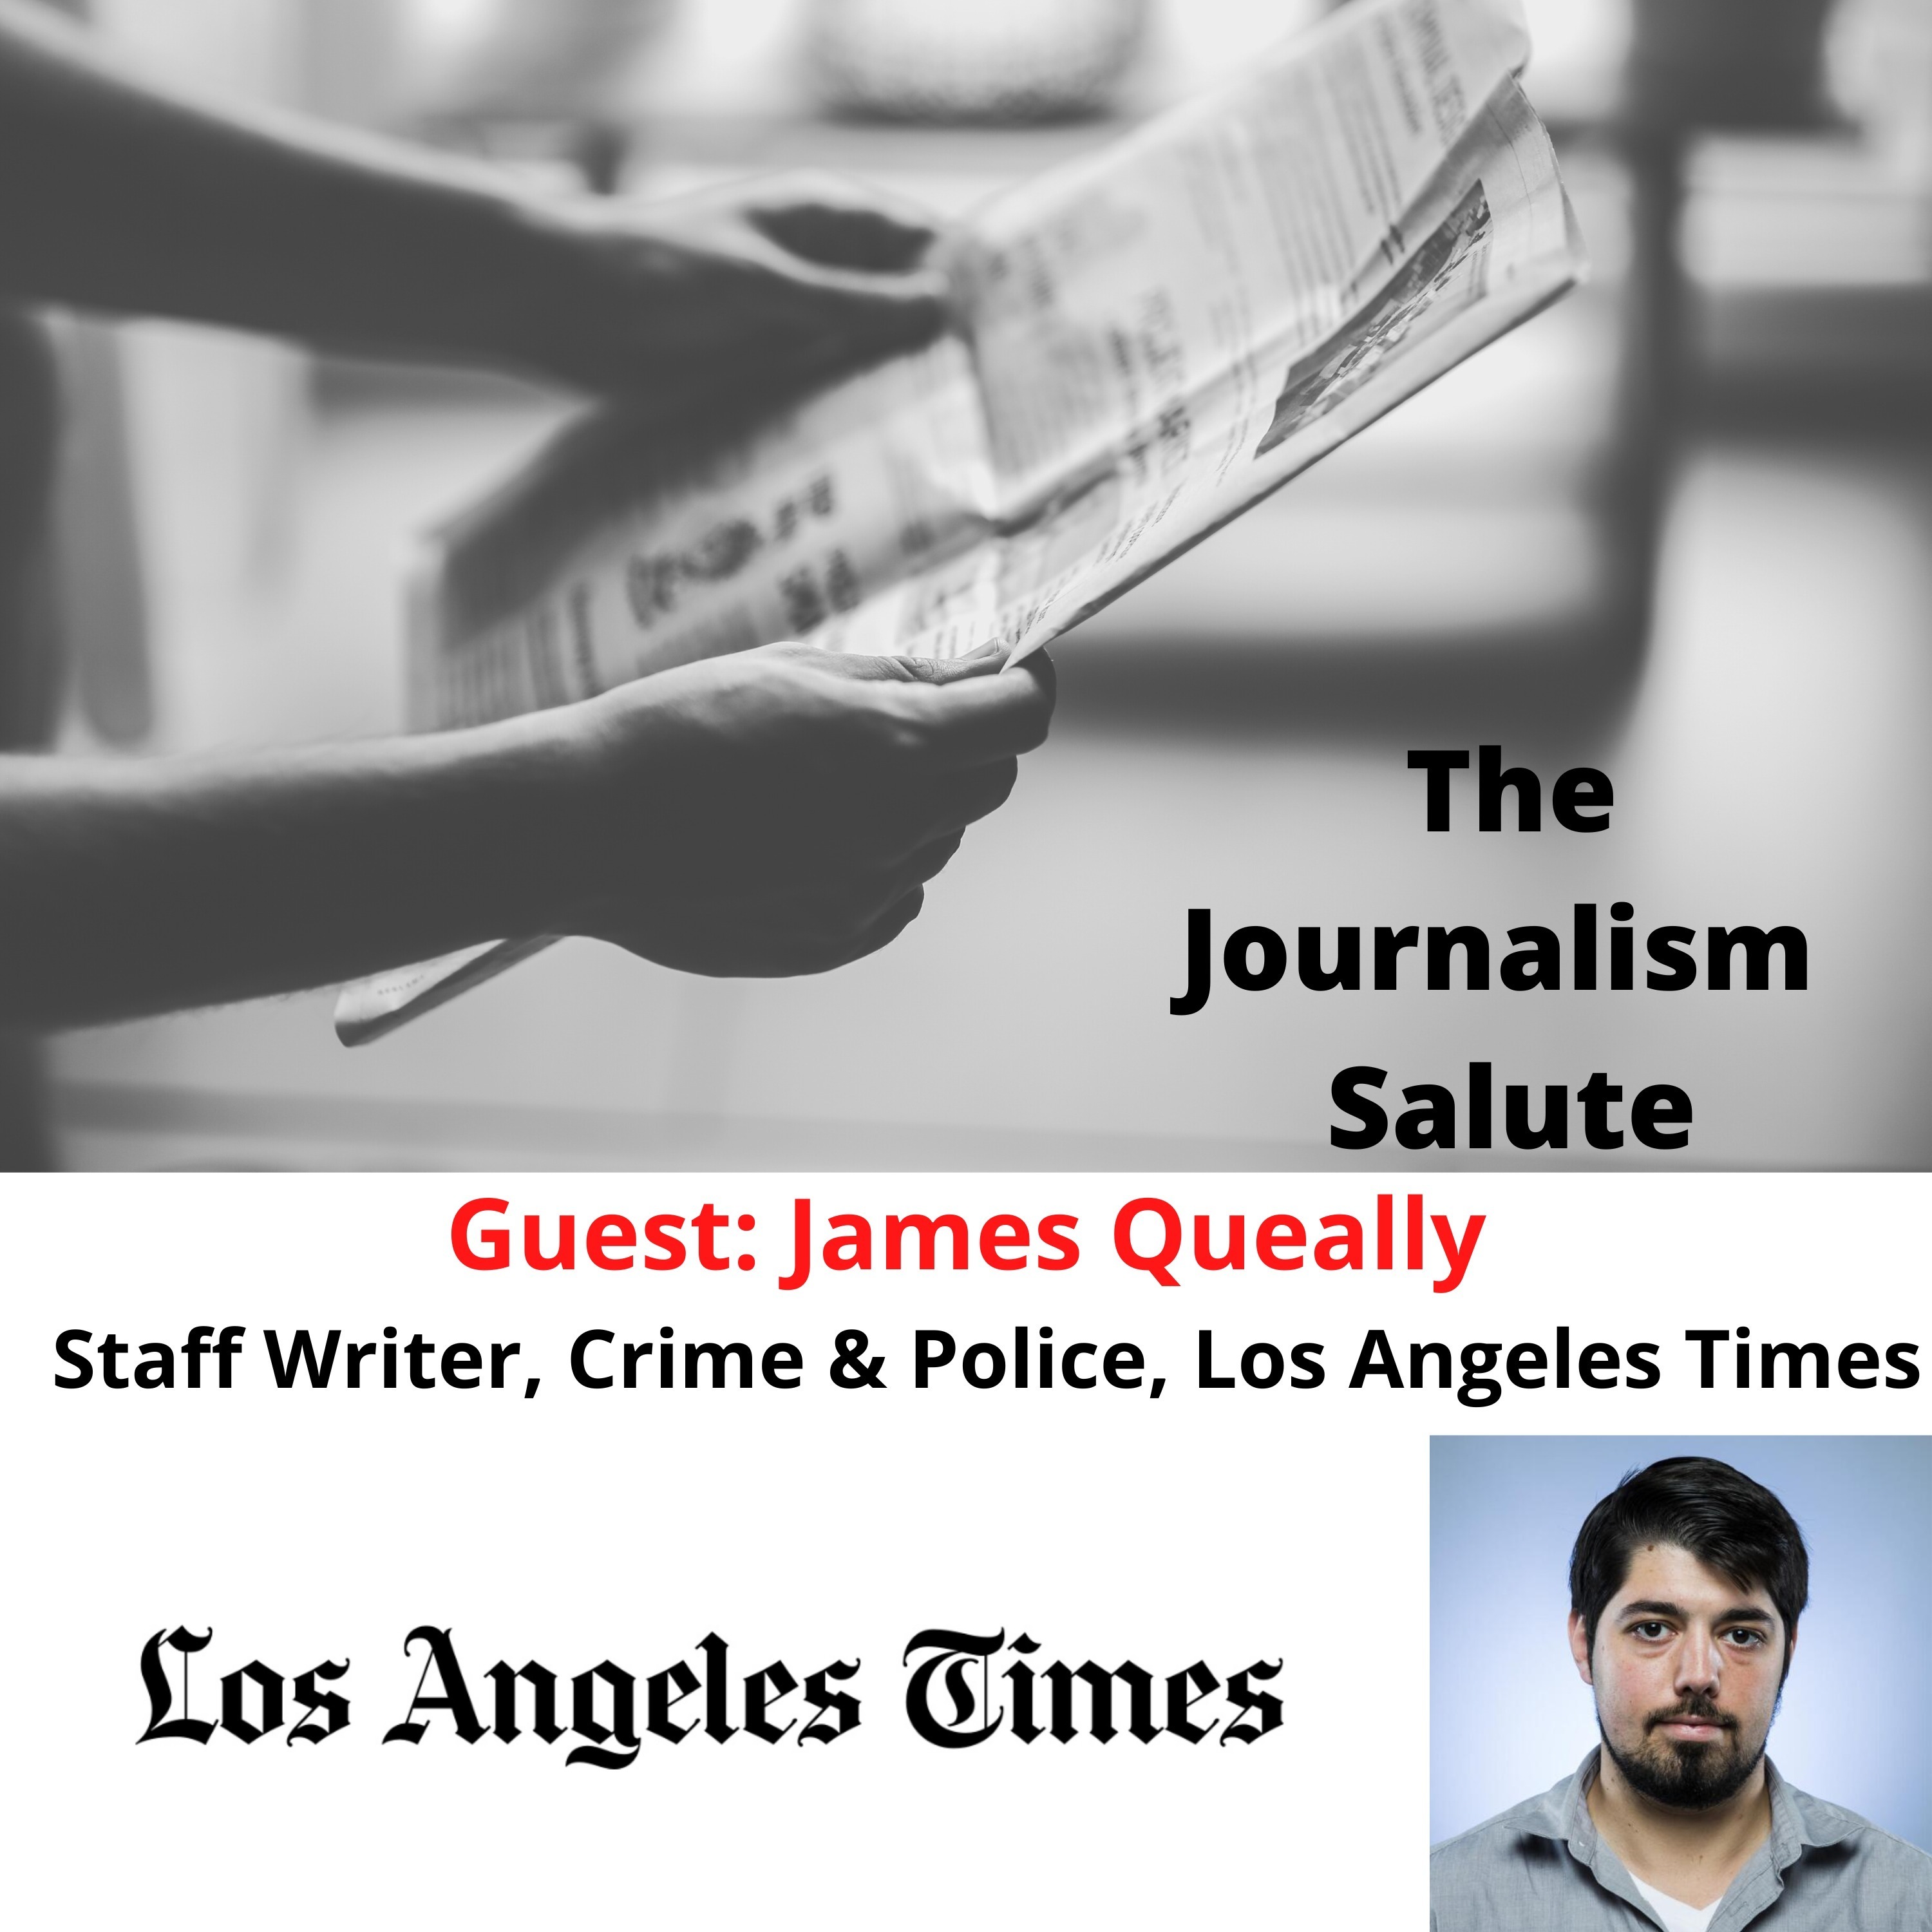 James Queally, Crime & Police Reporter, Los Angeles Times